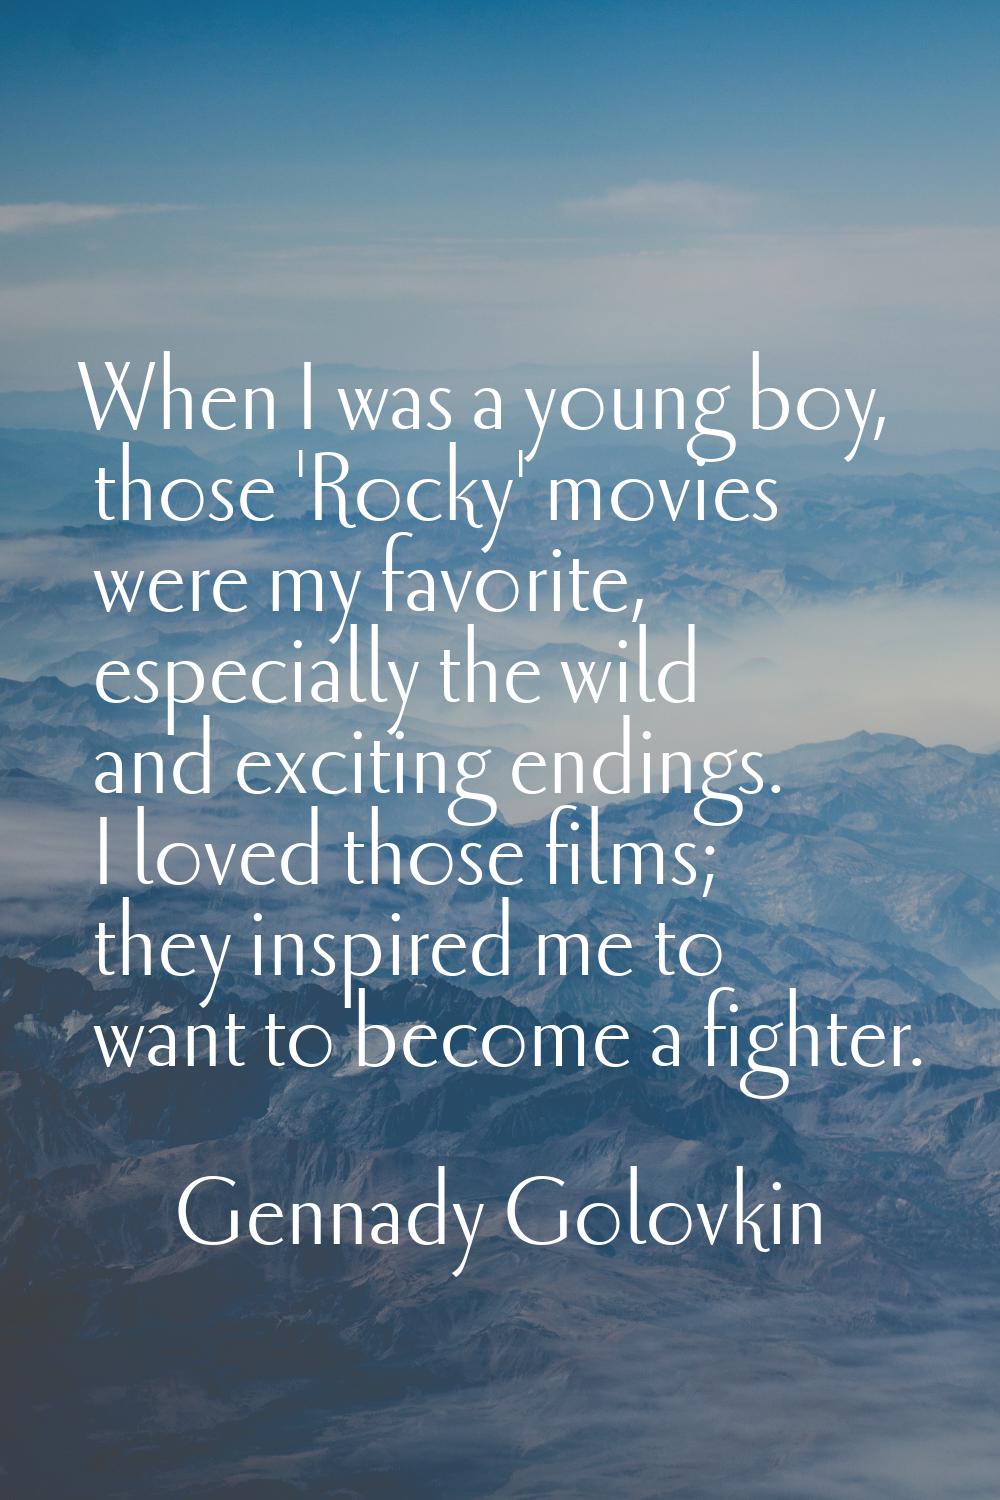 When I was a young boy, those 'Rocky' movies were my favorite, especially the wild and exciting end